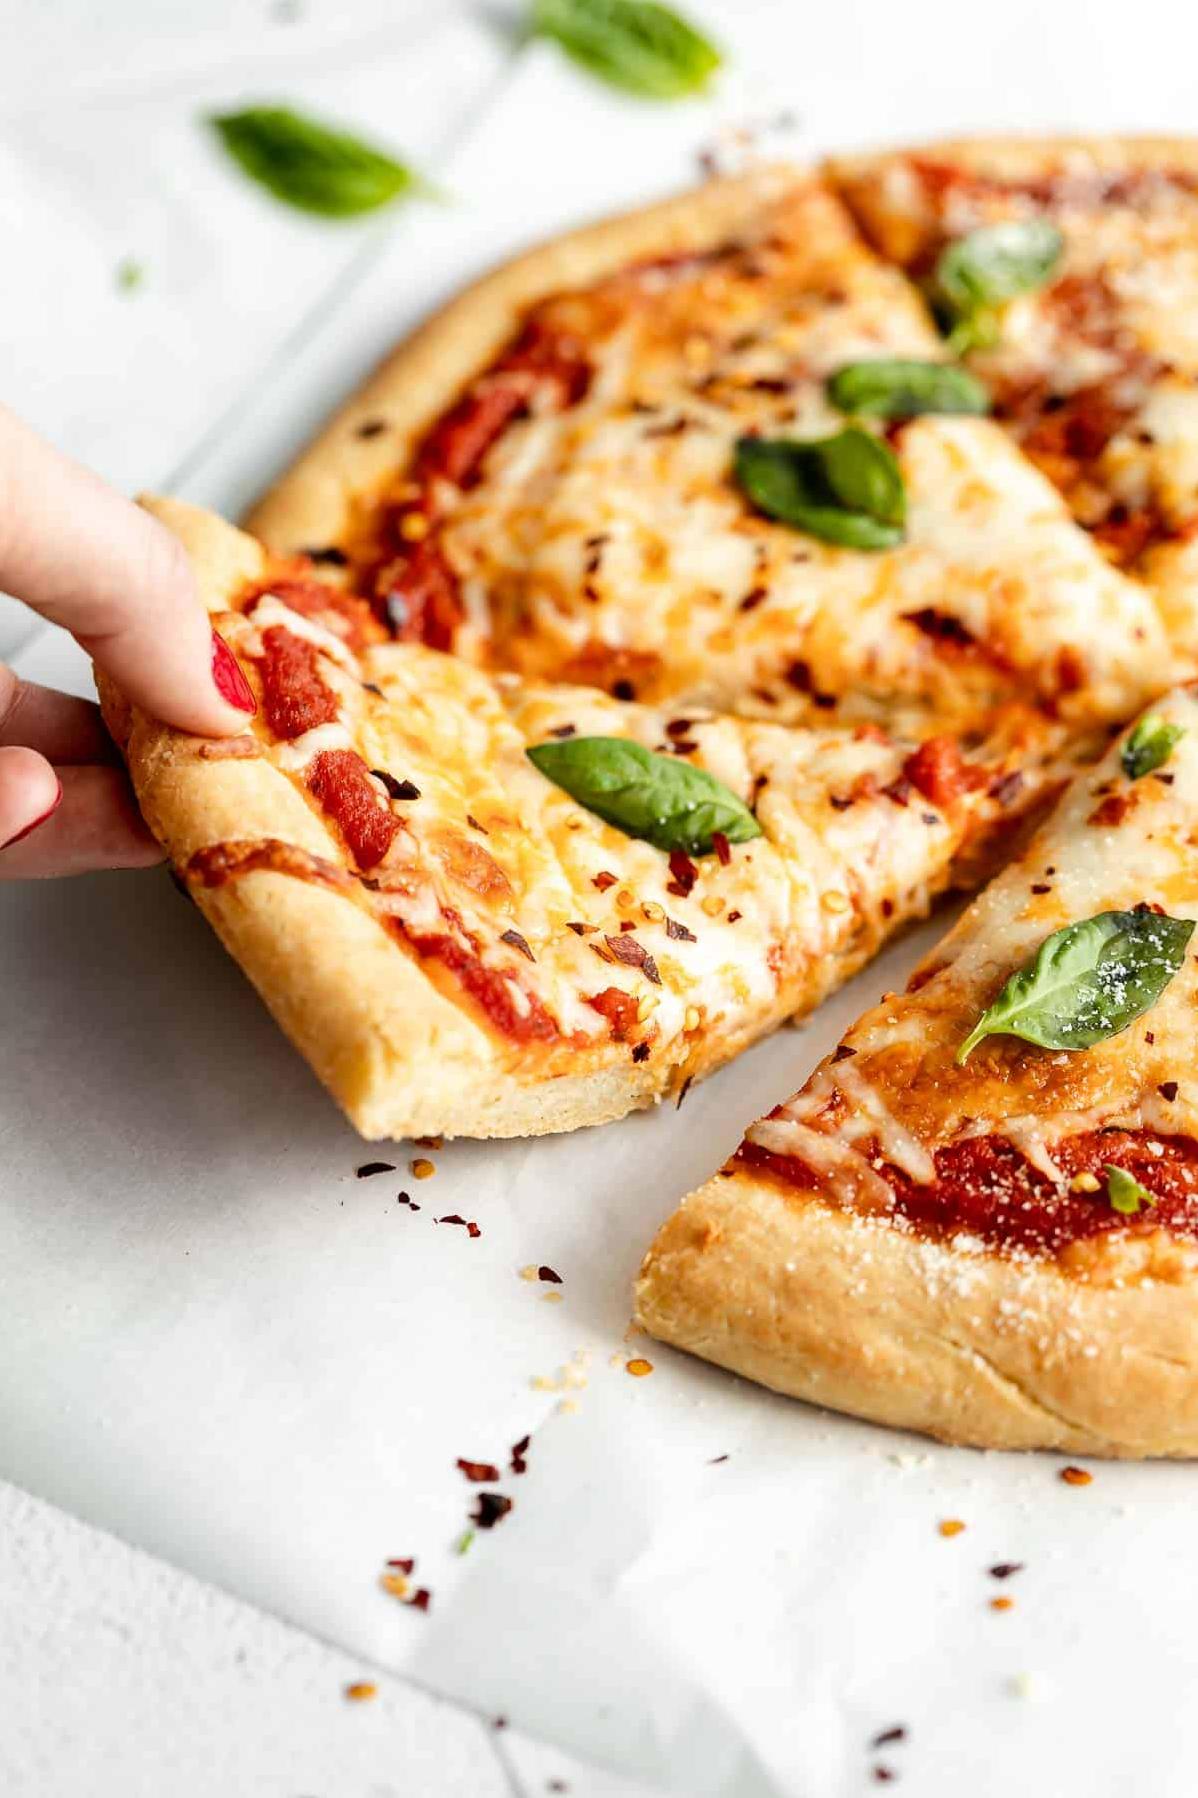  Say goodbye to gluten with this delicious pizza crust